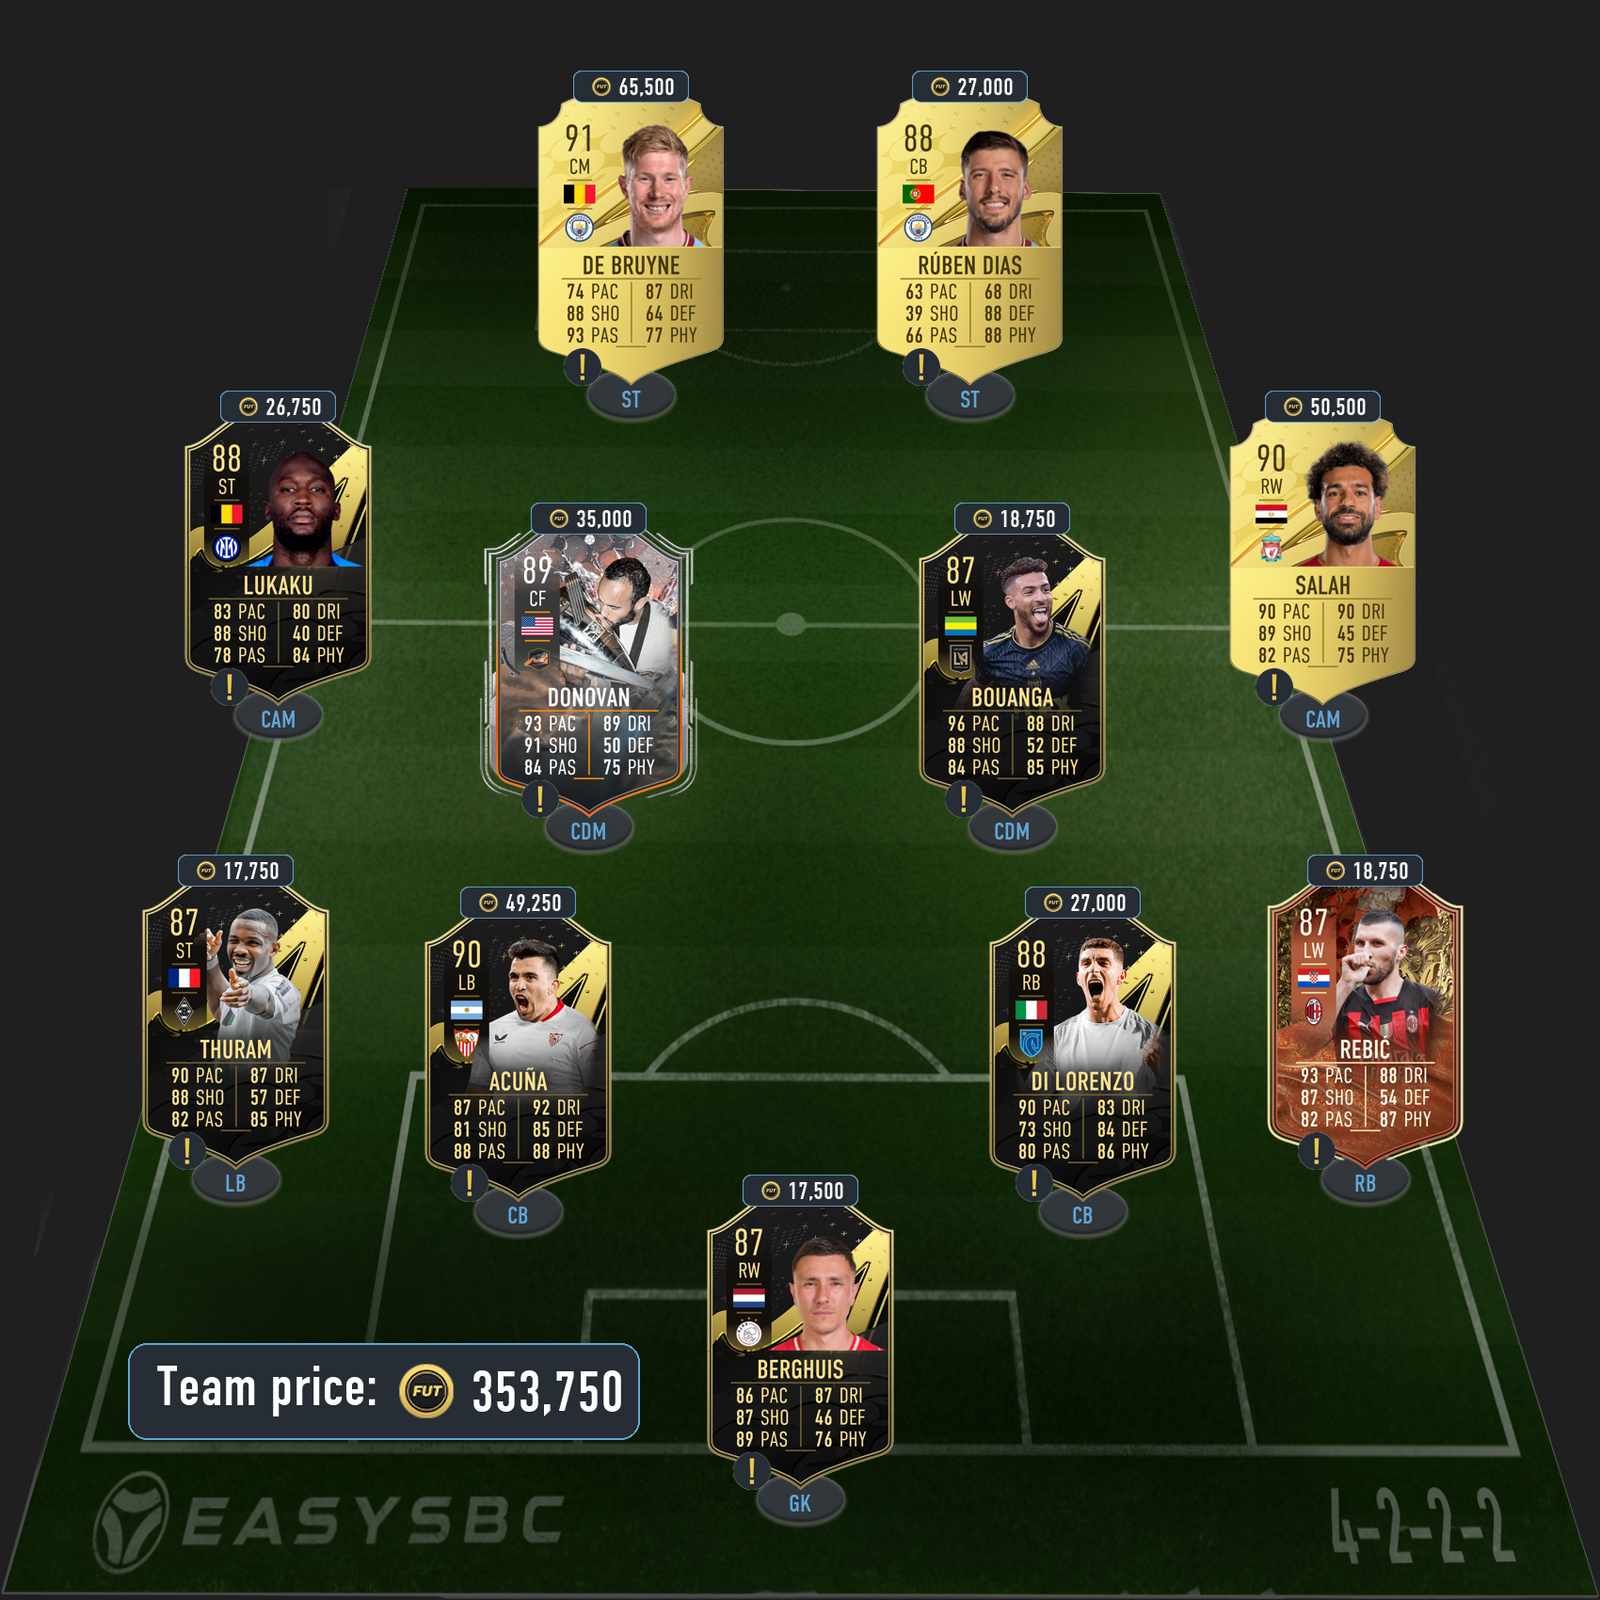 marchisio trophy titans hero sbc solution fifa 23 89-rated squad